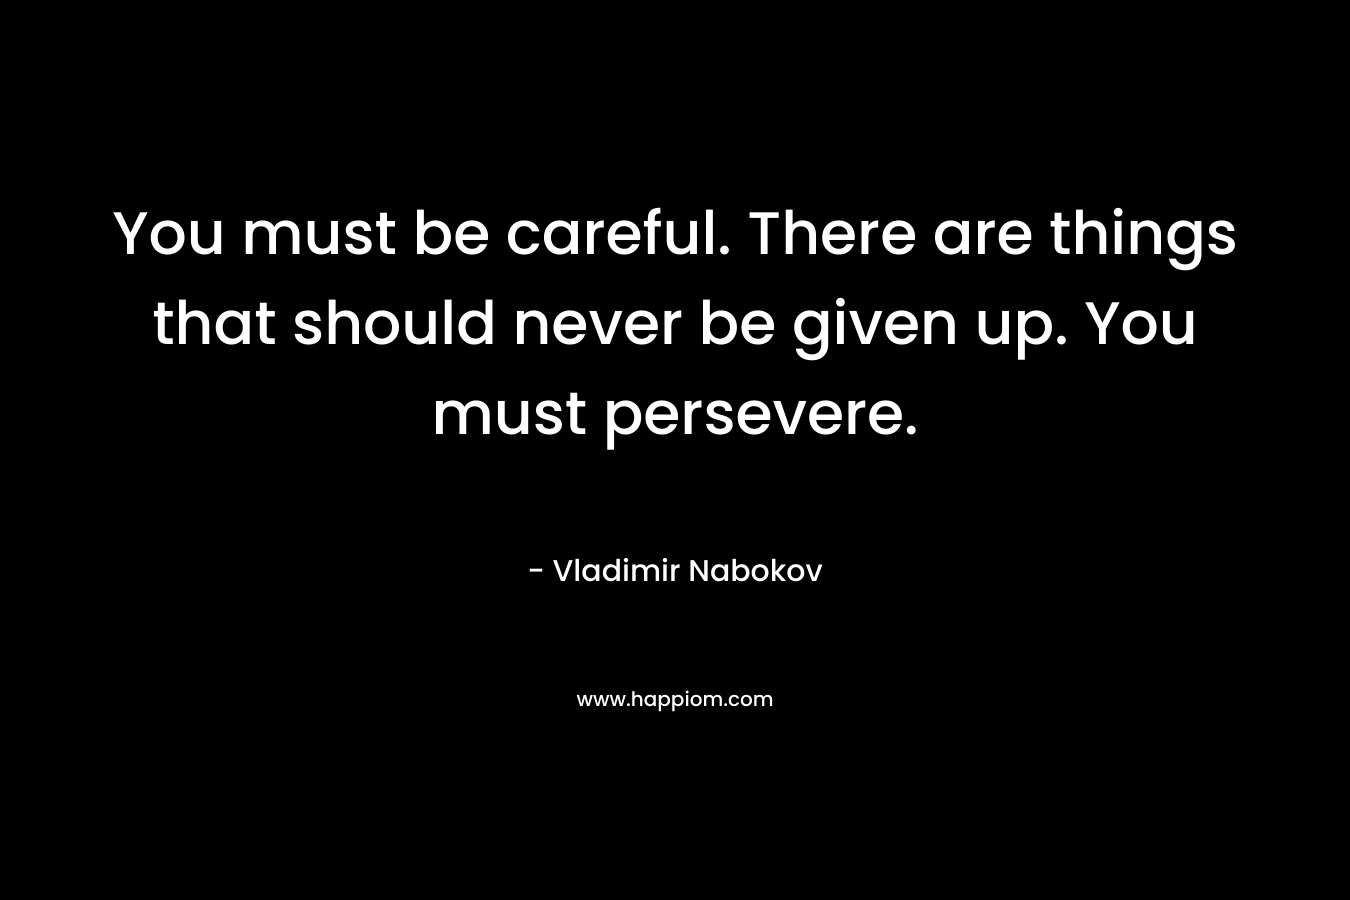 You must be careful. There are things that should never be given up. You must persevere. – Vladimir Nabokov